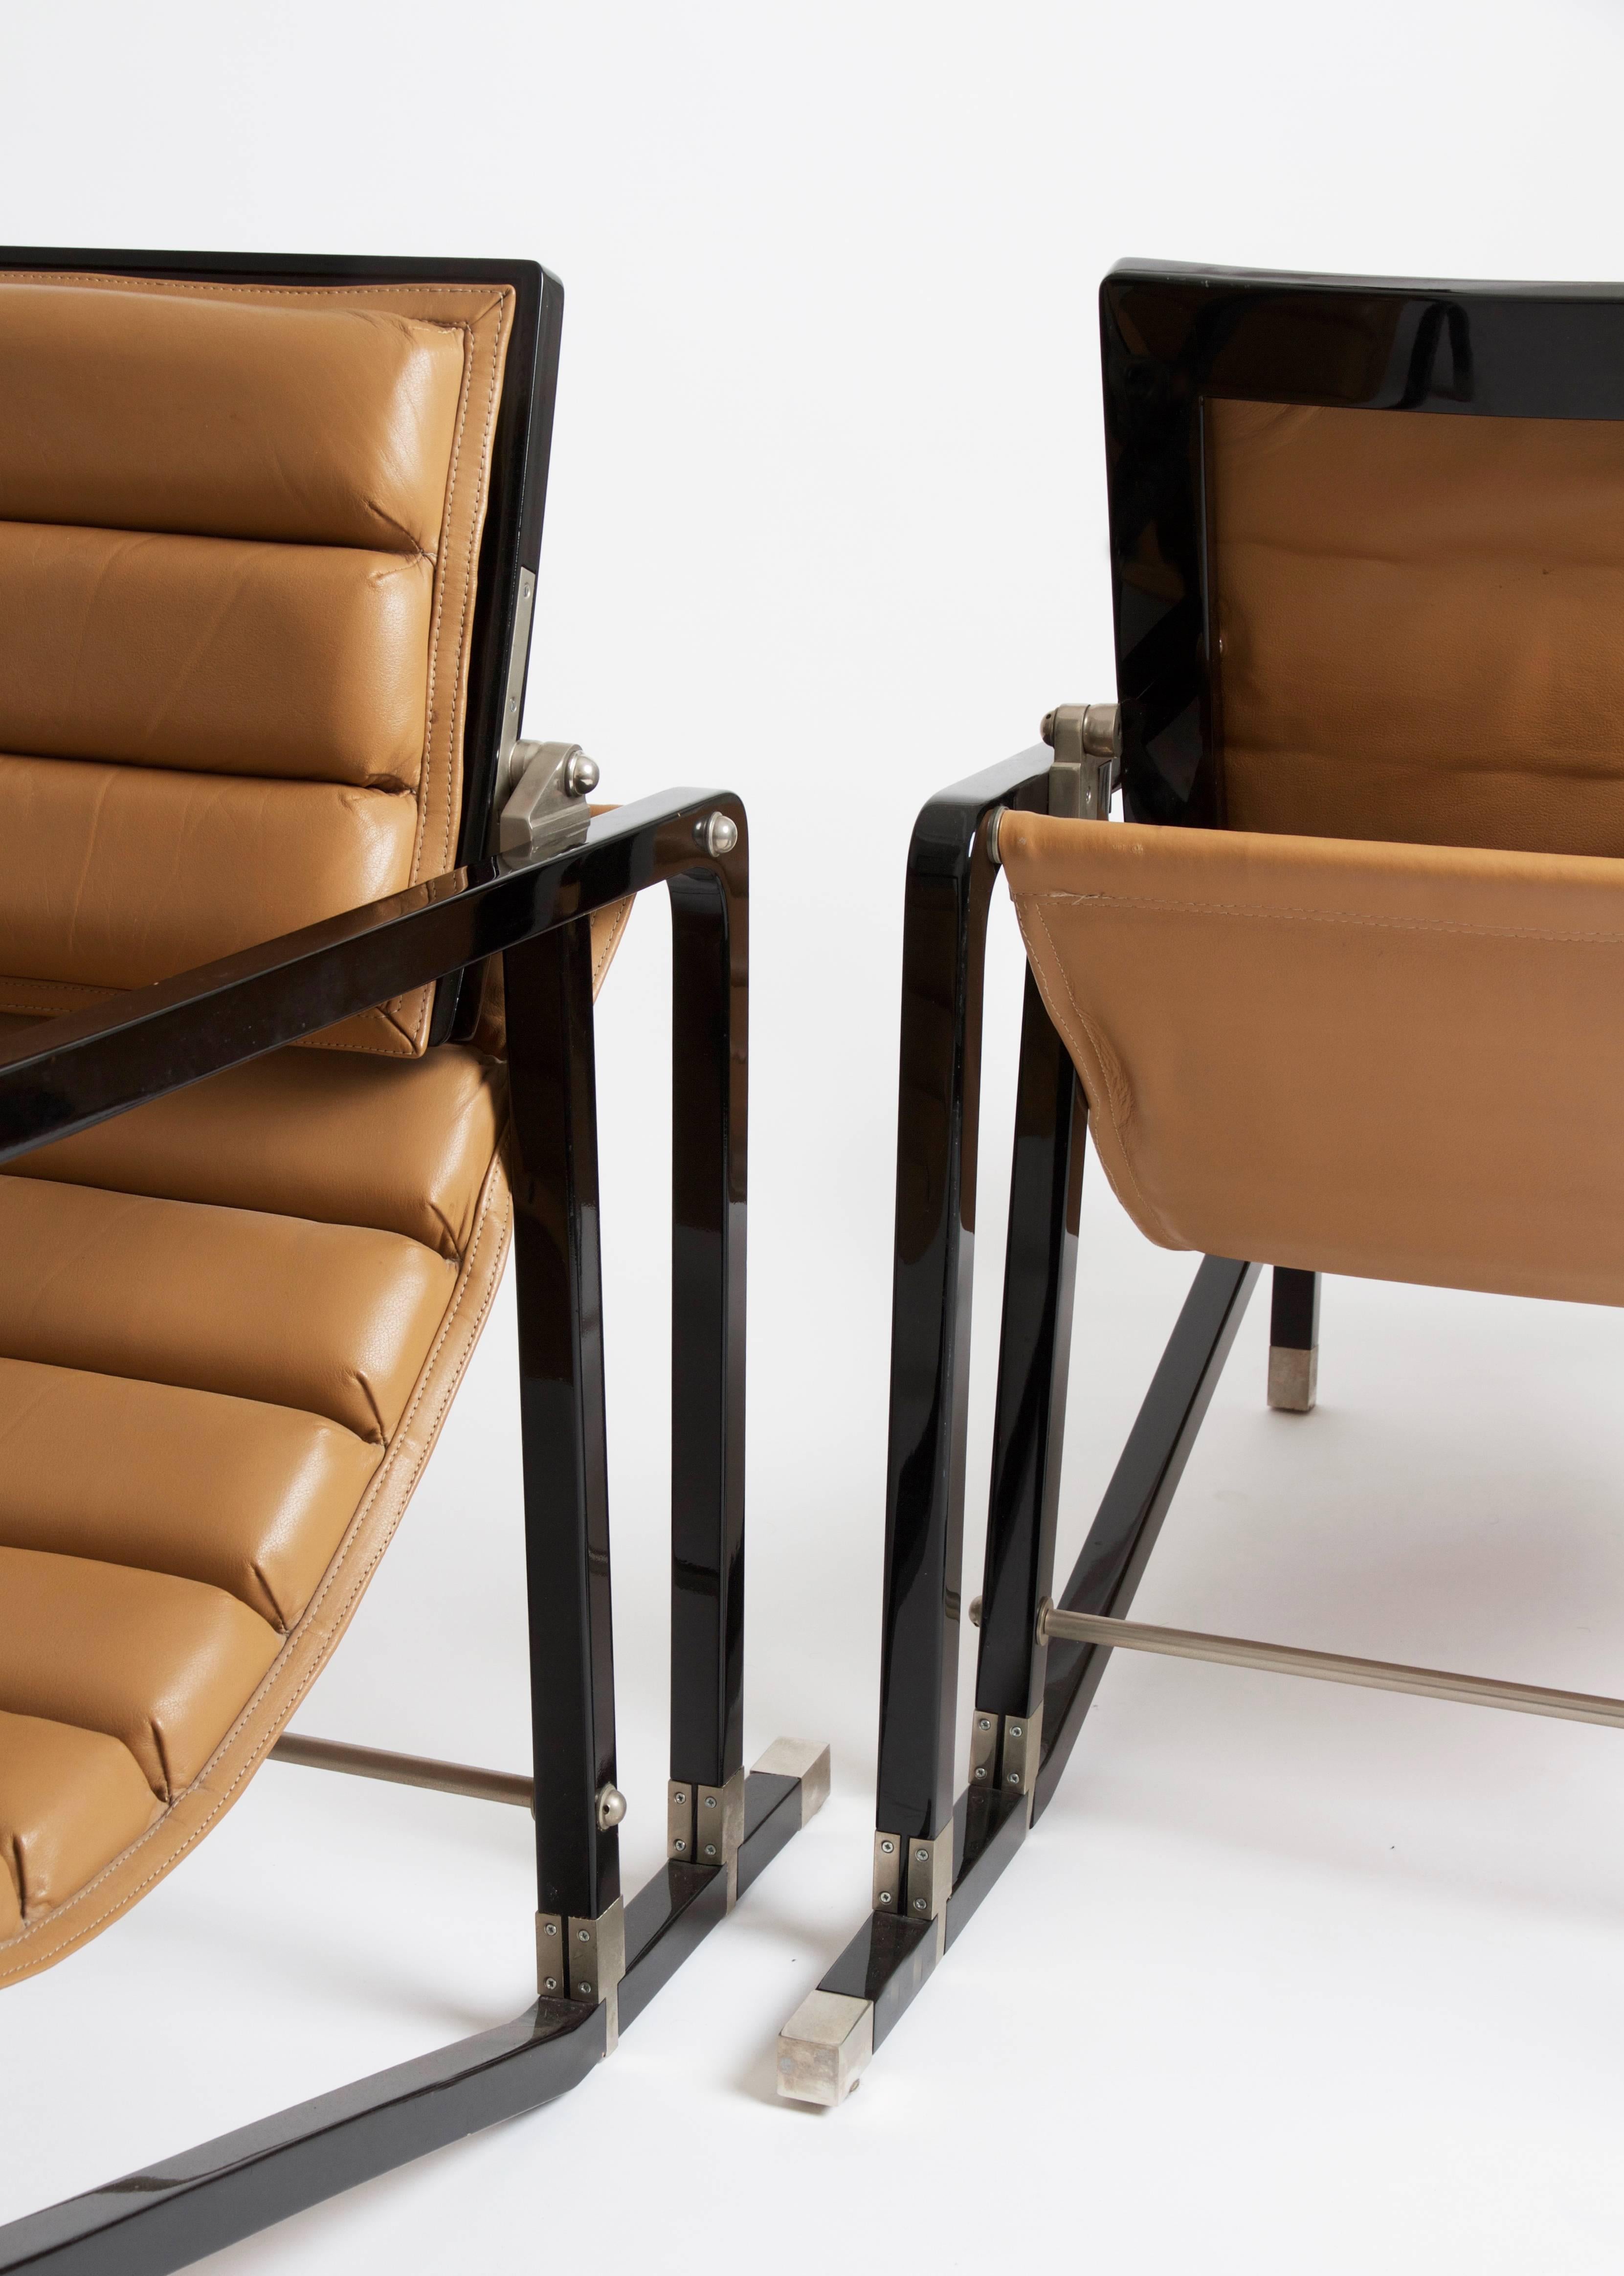 Eileen gray (1879-1976).
Pair of "Transat" chairs.
1st Edition by Andrée Putman for Ecart International, France, 1978.
Black lacquered wood, brushed metal, leather.
Excellent condition.
Model designed by Eileen Gray in 1927 for the